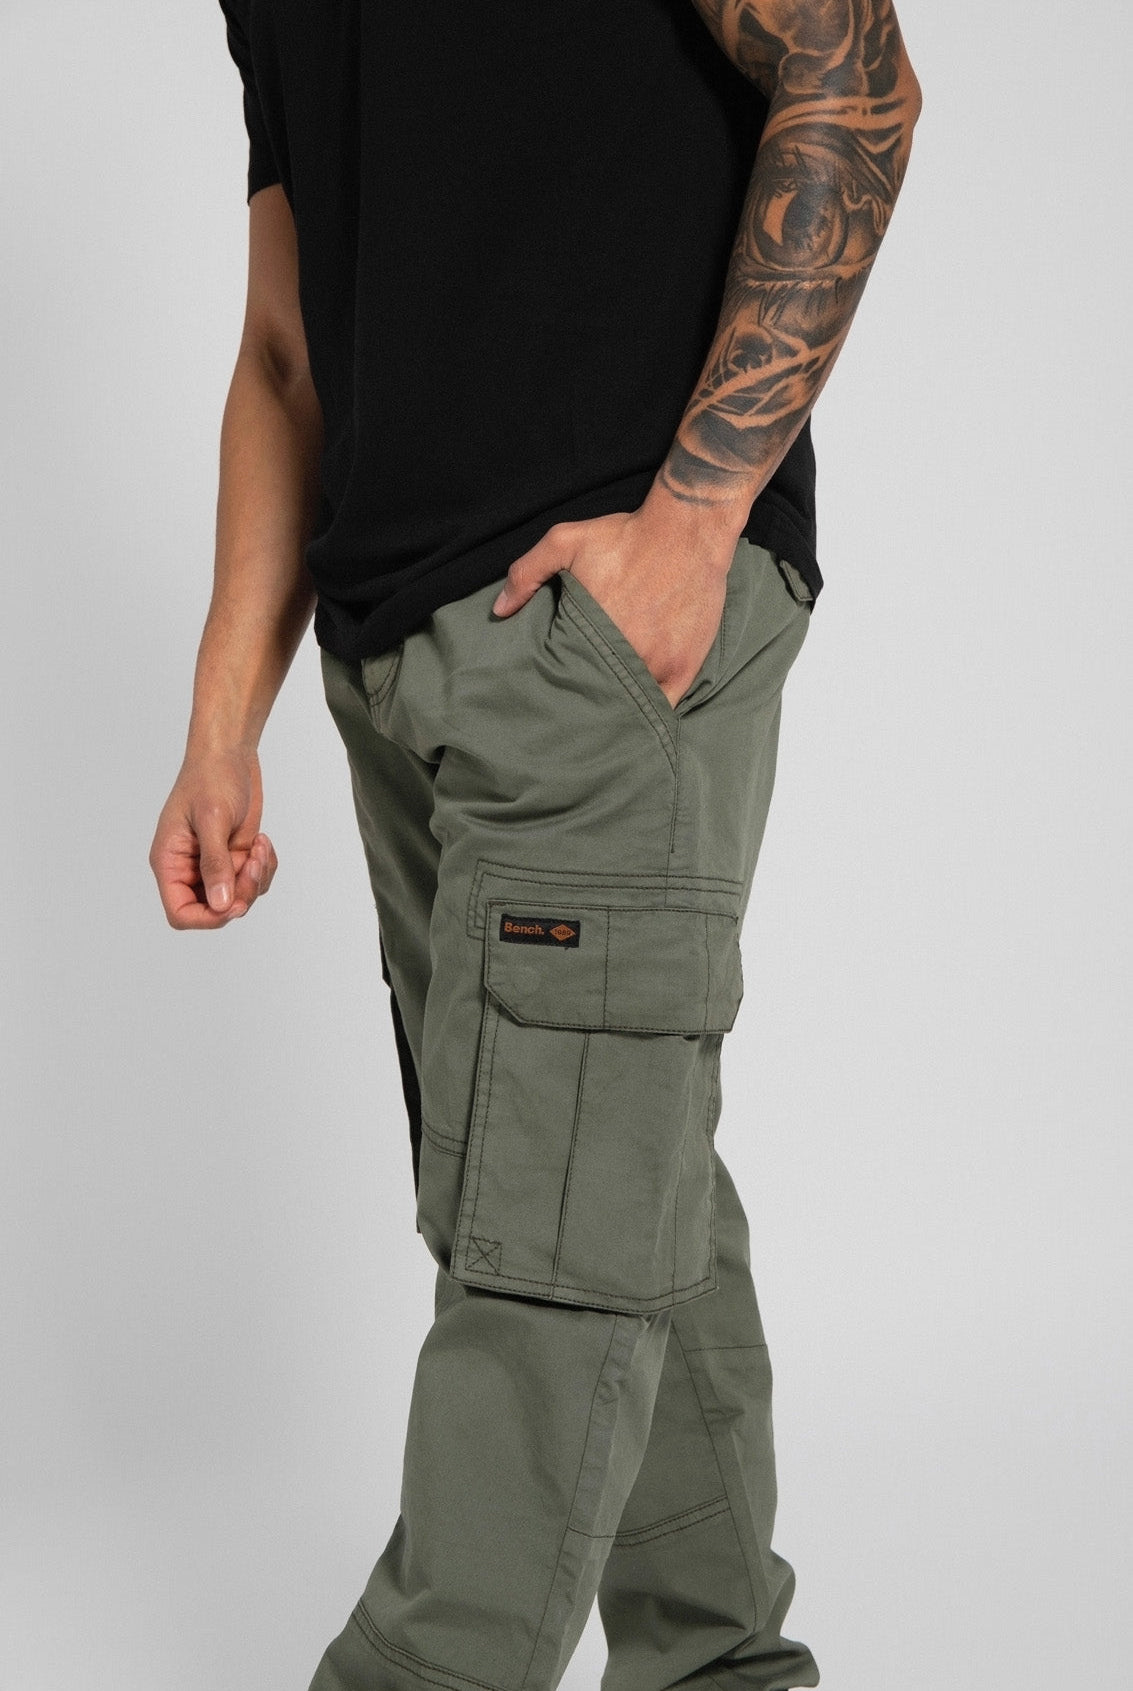 Pampero Pantalón Cargo Antidesgarro Ripstop Cargo Pants Relaxed Fit  Straight Leg Cargo Pants - (Various Sizes & Colors Available)